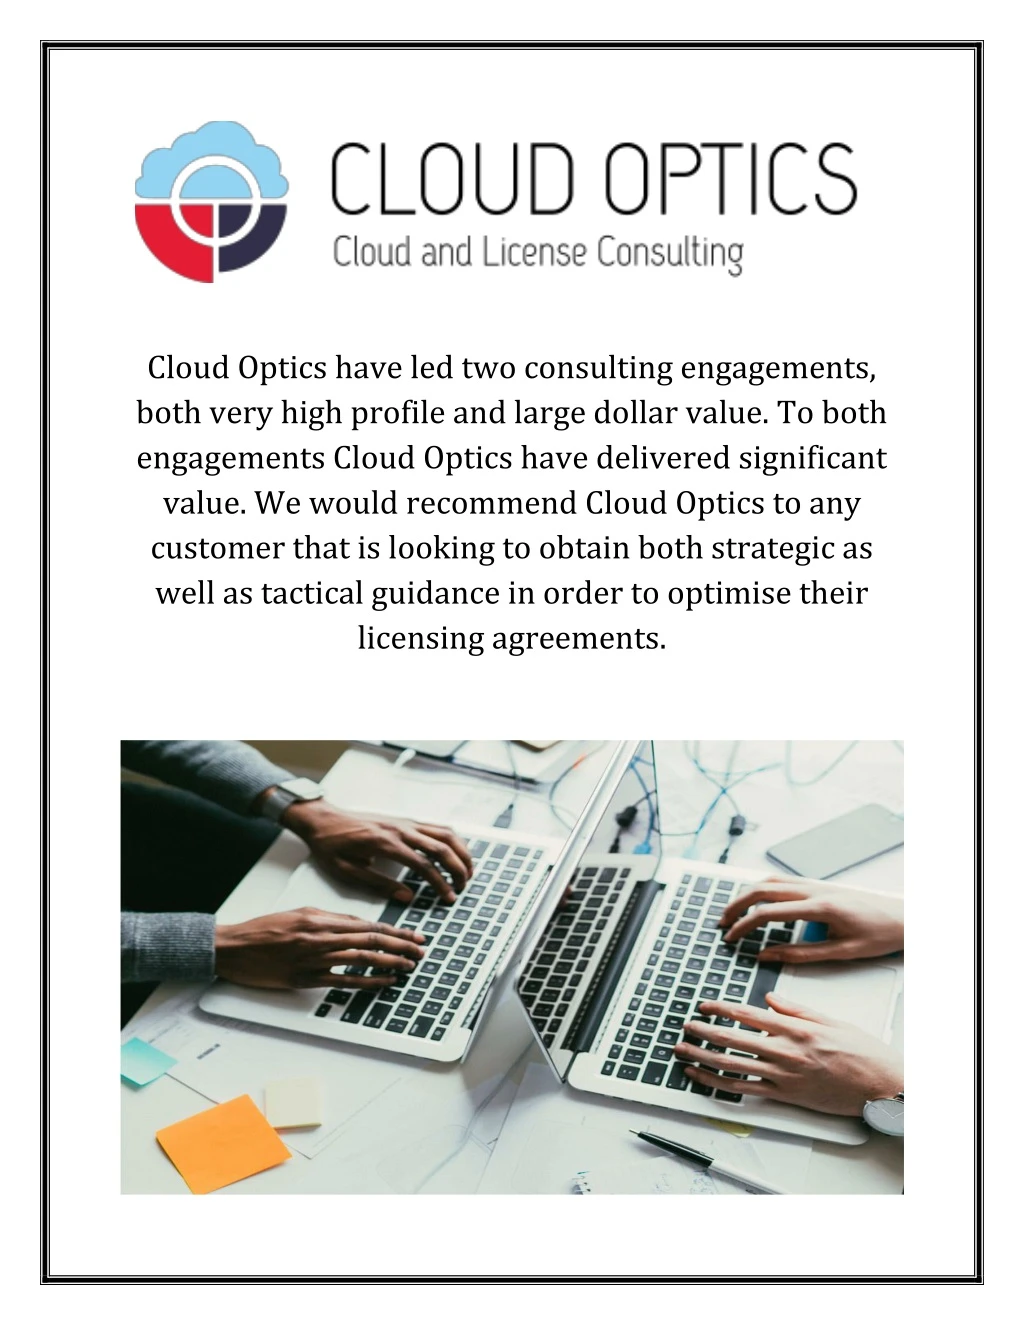 cloud optics have led two consulting engagements